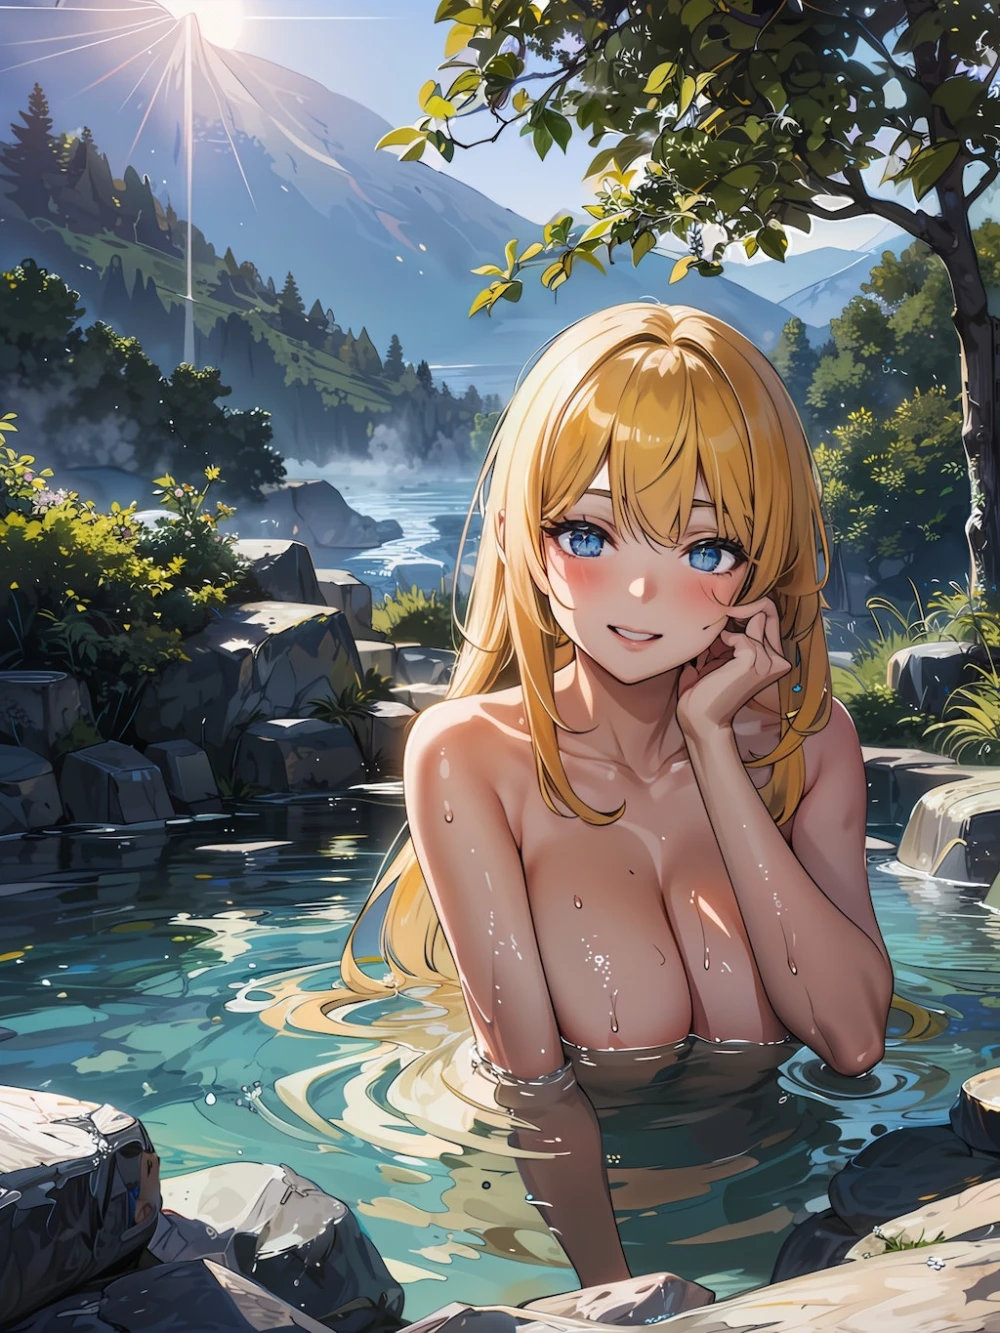 onsen-anime-style-all-ages-17